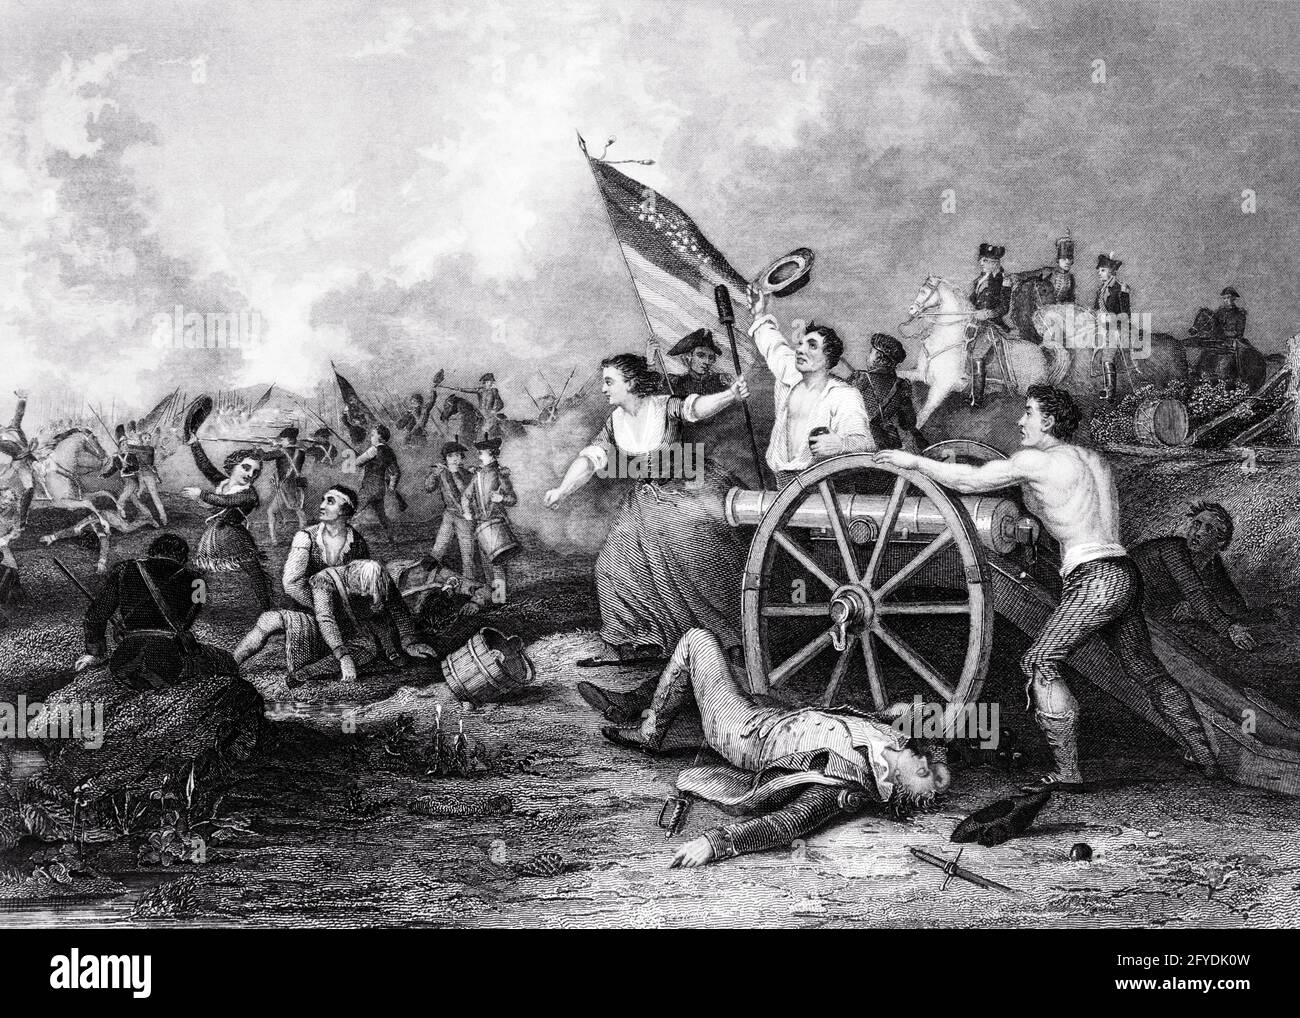 1770s 1778 ILLUSTRATION MOLLY PITCHER FIRING ARTILLERY SHE TOOK OVER CANNON WHEN HUSBAND FELL BATTLE OF MONMOUTH NEW JERSEY USA - q53060 CPC001 HARS INSPIRATION UNITED STATES OF AMERICA CARING MALES RISK B&W NORTH AMERICA FREEDOM NORTH AMERICAN PITCHER ADVENTURE COURAGE BRAVERY EXCITEMENT LEADERSHIP LEGENDARY SHE 1778 FIRING NJ UNIFORMS FELL HEROINE SUPPORT MONMOUTH NEW JERSEY REVOLT AMERICAN REVOLUTIONARY WAR 1770s COLONIES HERO JUNE 28 MID-ADULT MID-ADULT WOMAN MOLLY RED WHITE AND BLUE STARS AND STRIPS ARTILLERY BLACK AND WHITE BRAVE OLD FASHIONED Stock Photo